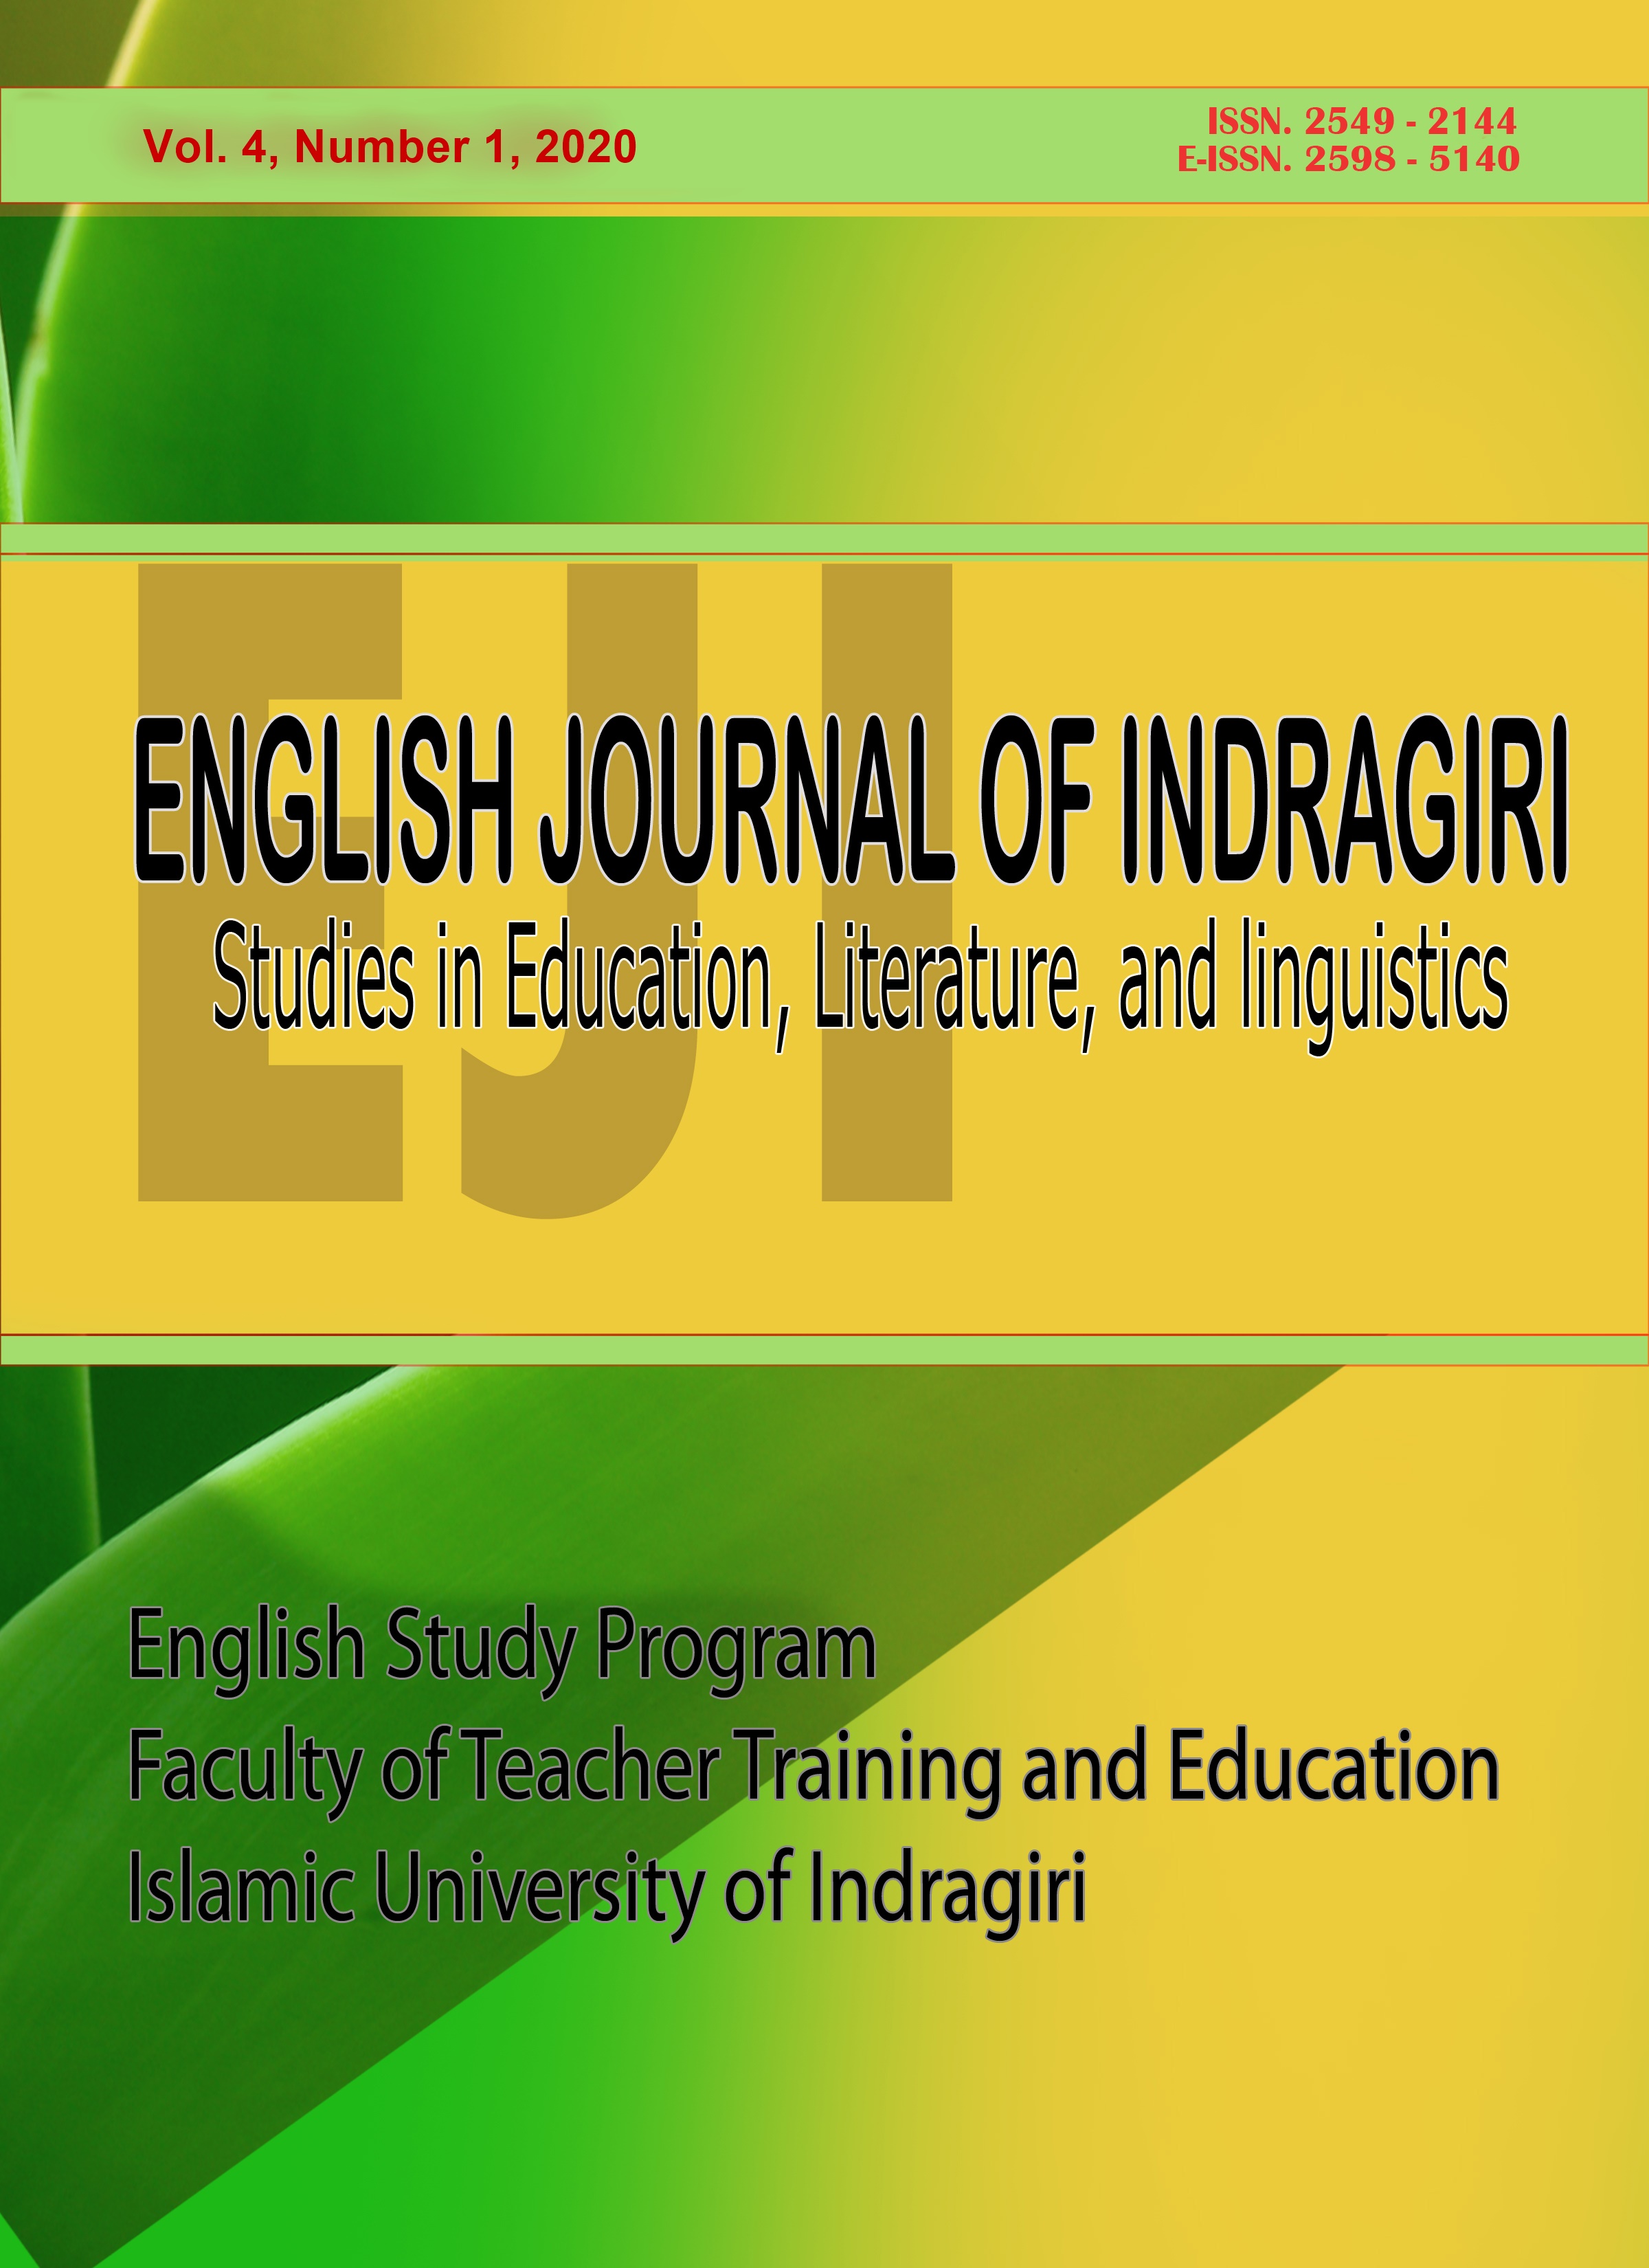 					View Vol. 4 No. 1 (2020): EJI (English Journal of Indragiri): Studies in Education, Literature, and Linguistics
				